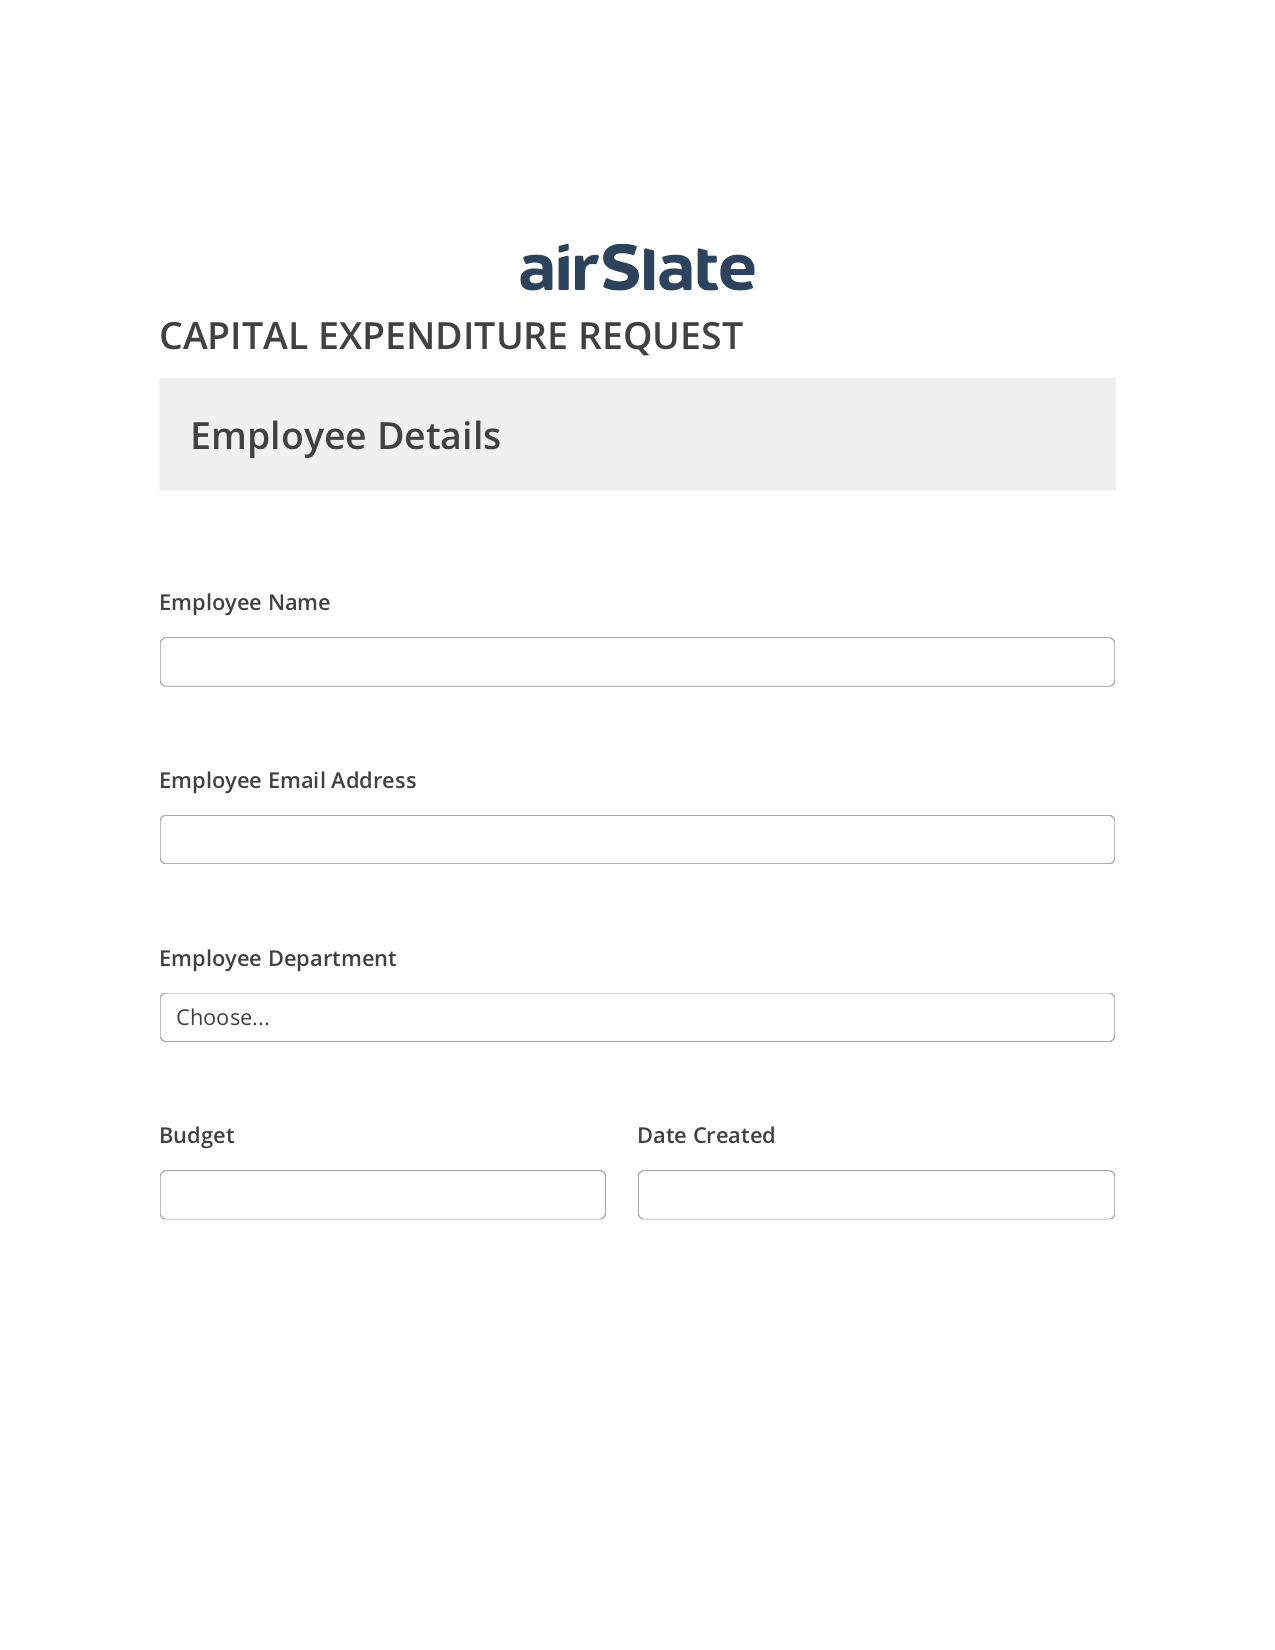 Capital Expenditure Request Approval Workflow Pre-fill from MySQL Dropdown Options Bot, Create Slate Reminder Bot, Export to Excel 365 Bot